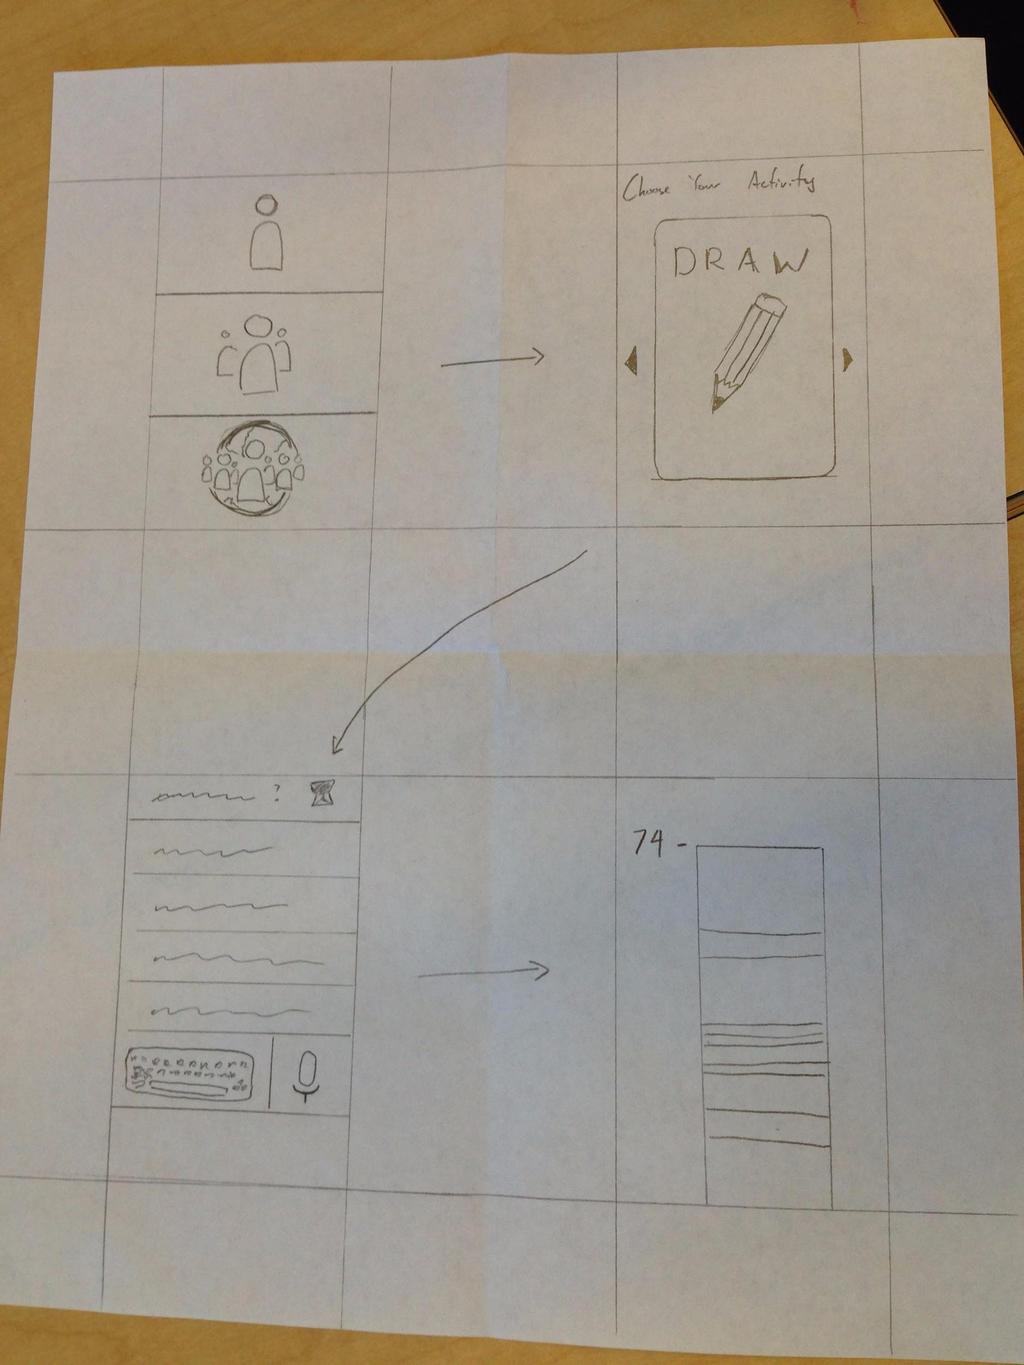 create storyboards for the top